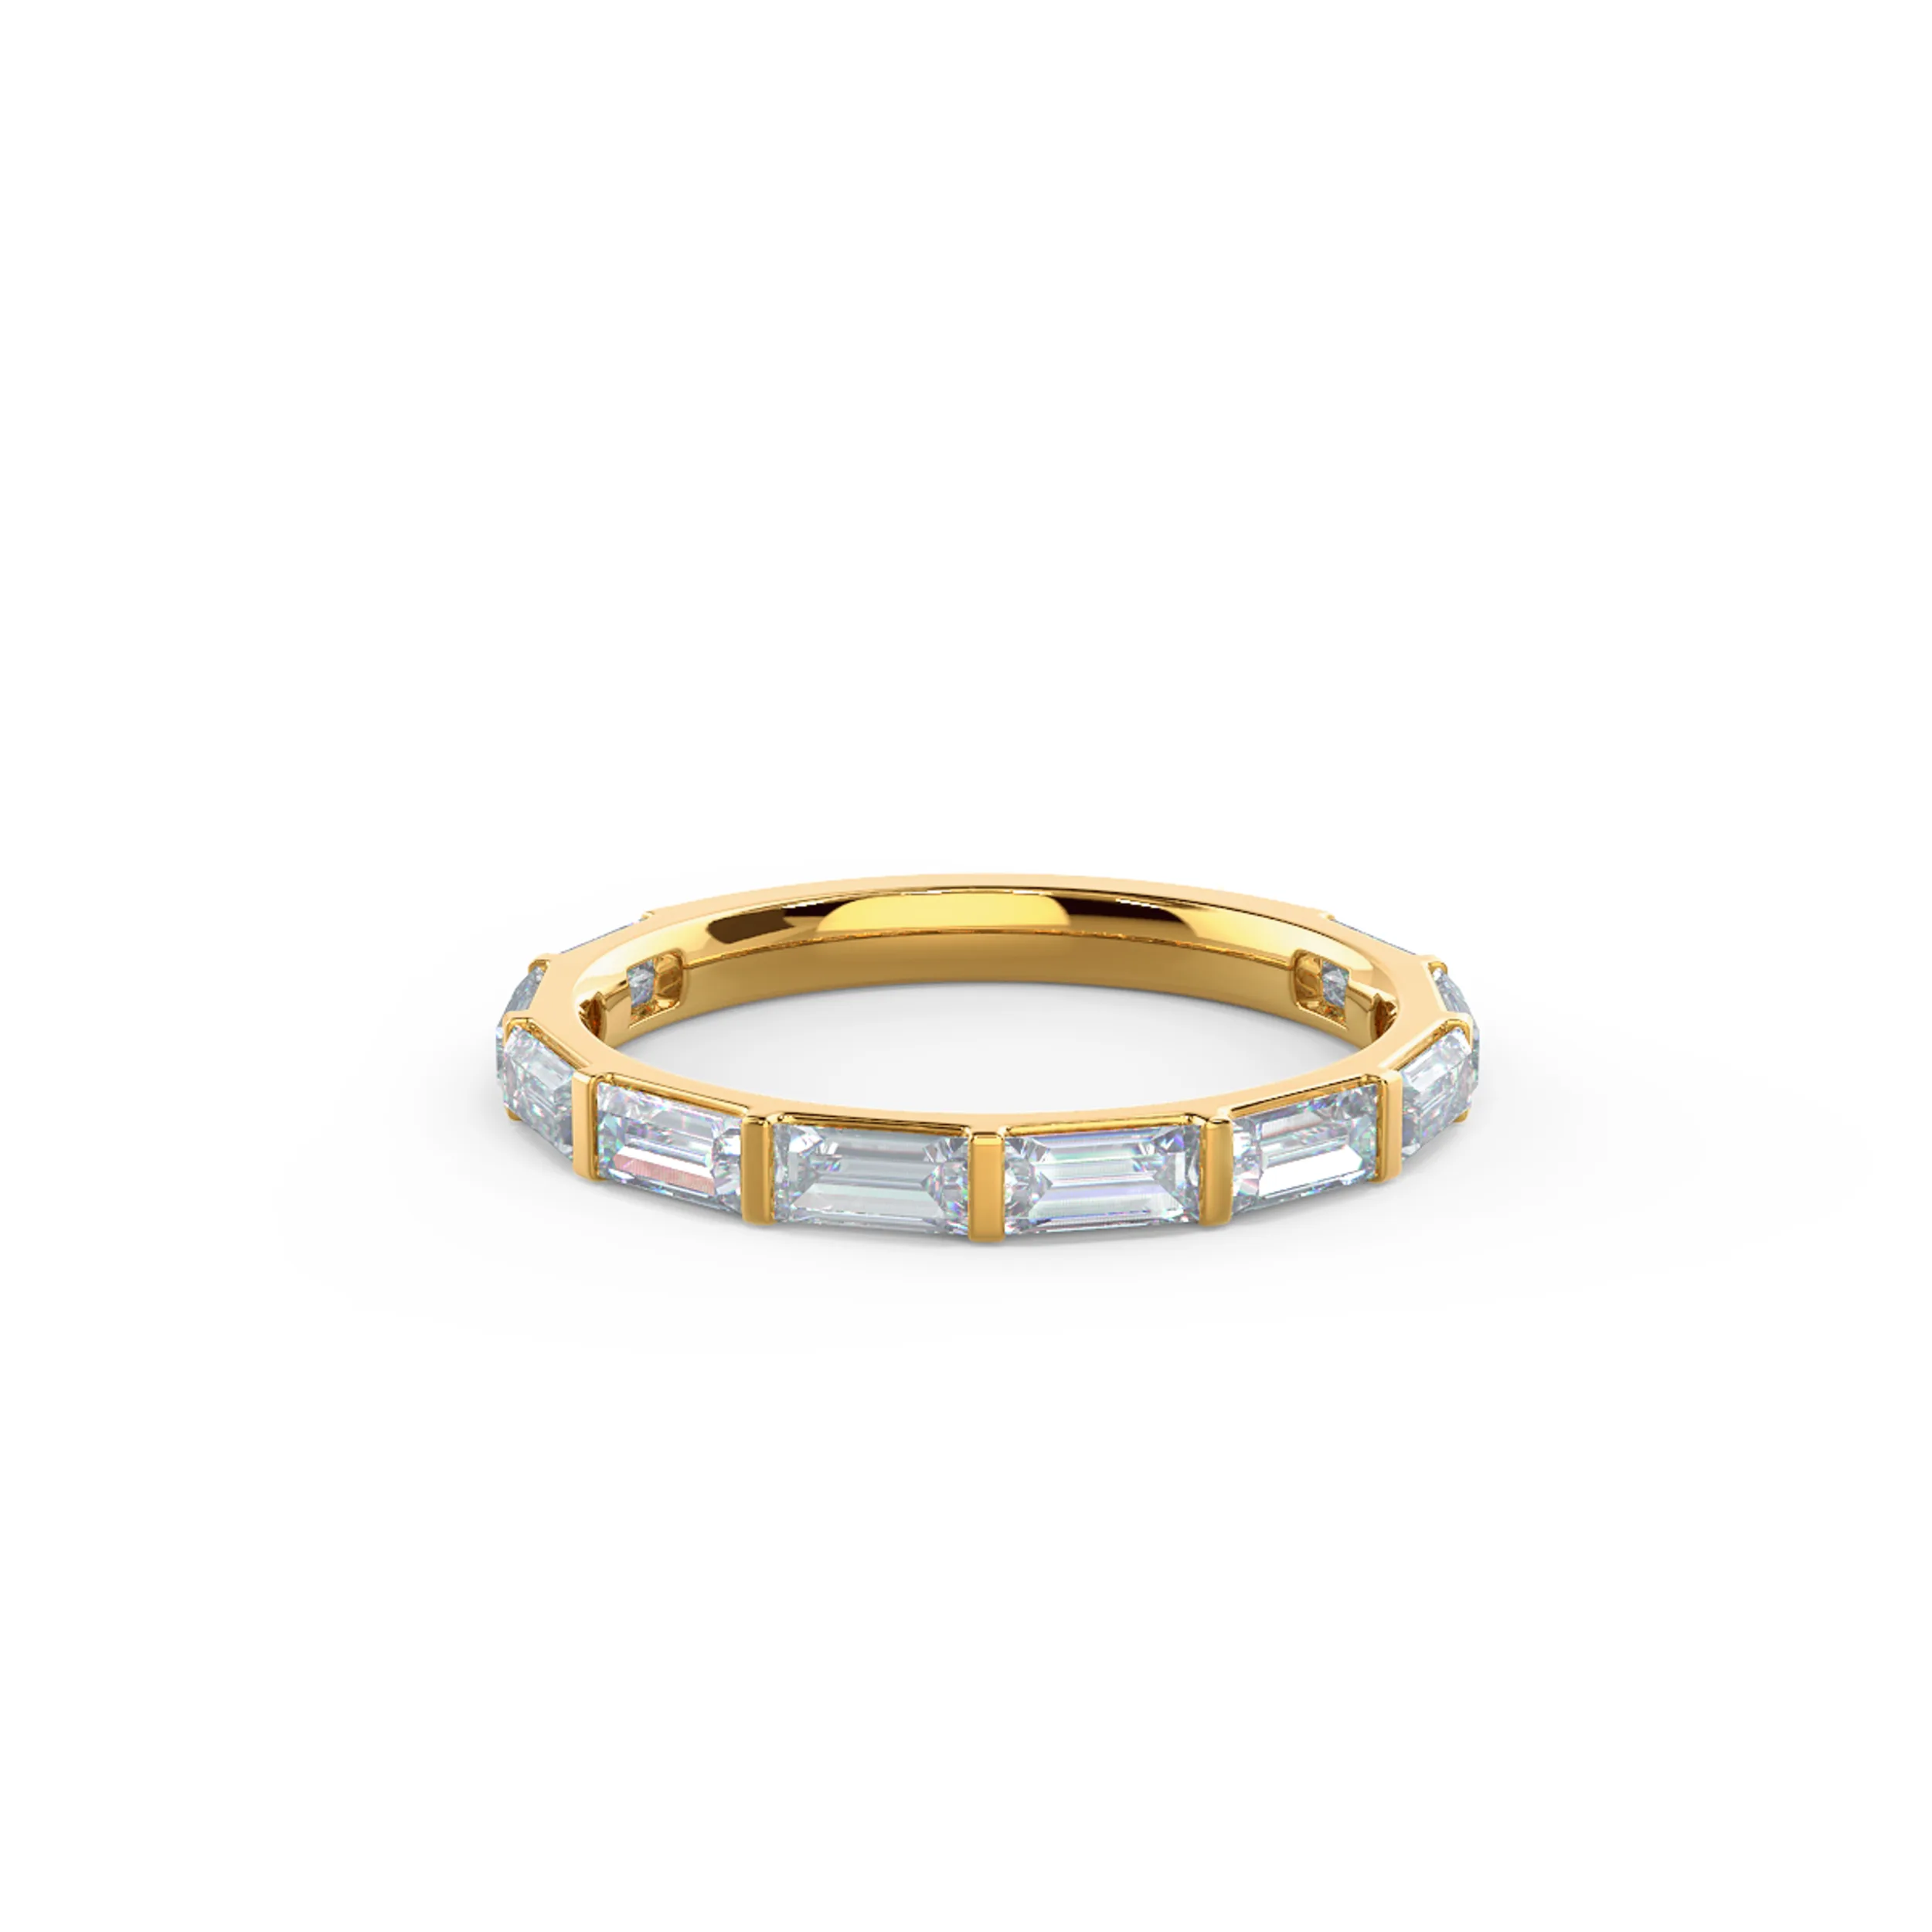 Hand Selected 1.1 Carat Diamonds Baguette East-West Three Quarter Band in 14kt Yellow Gold (Main View)